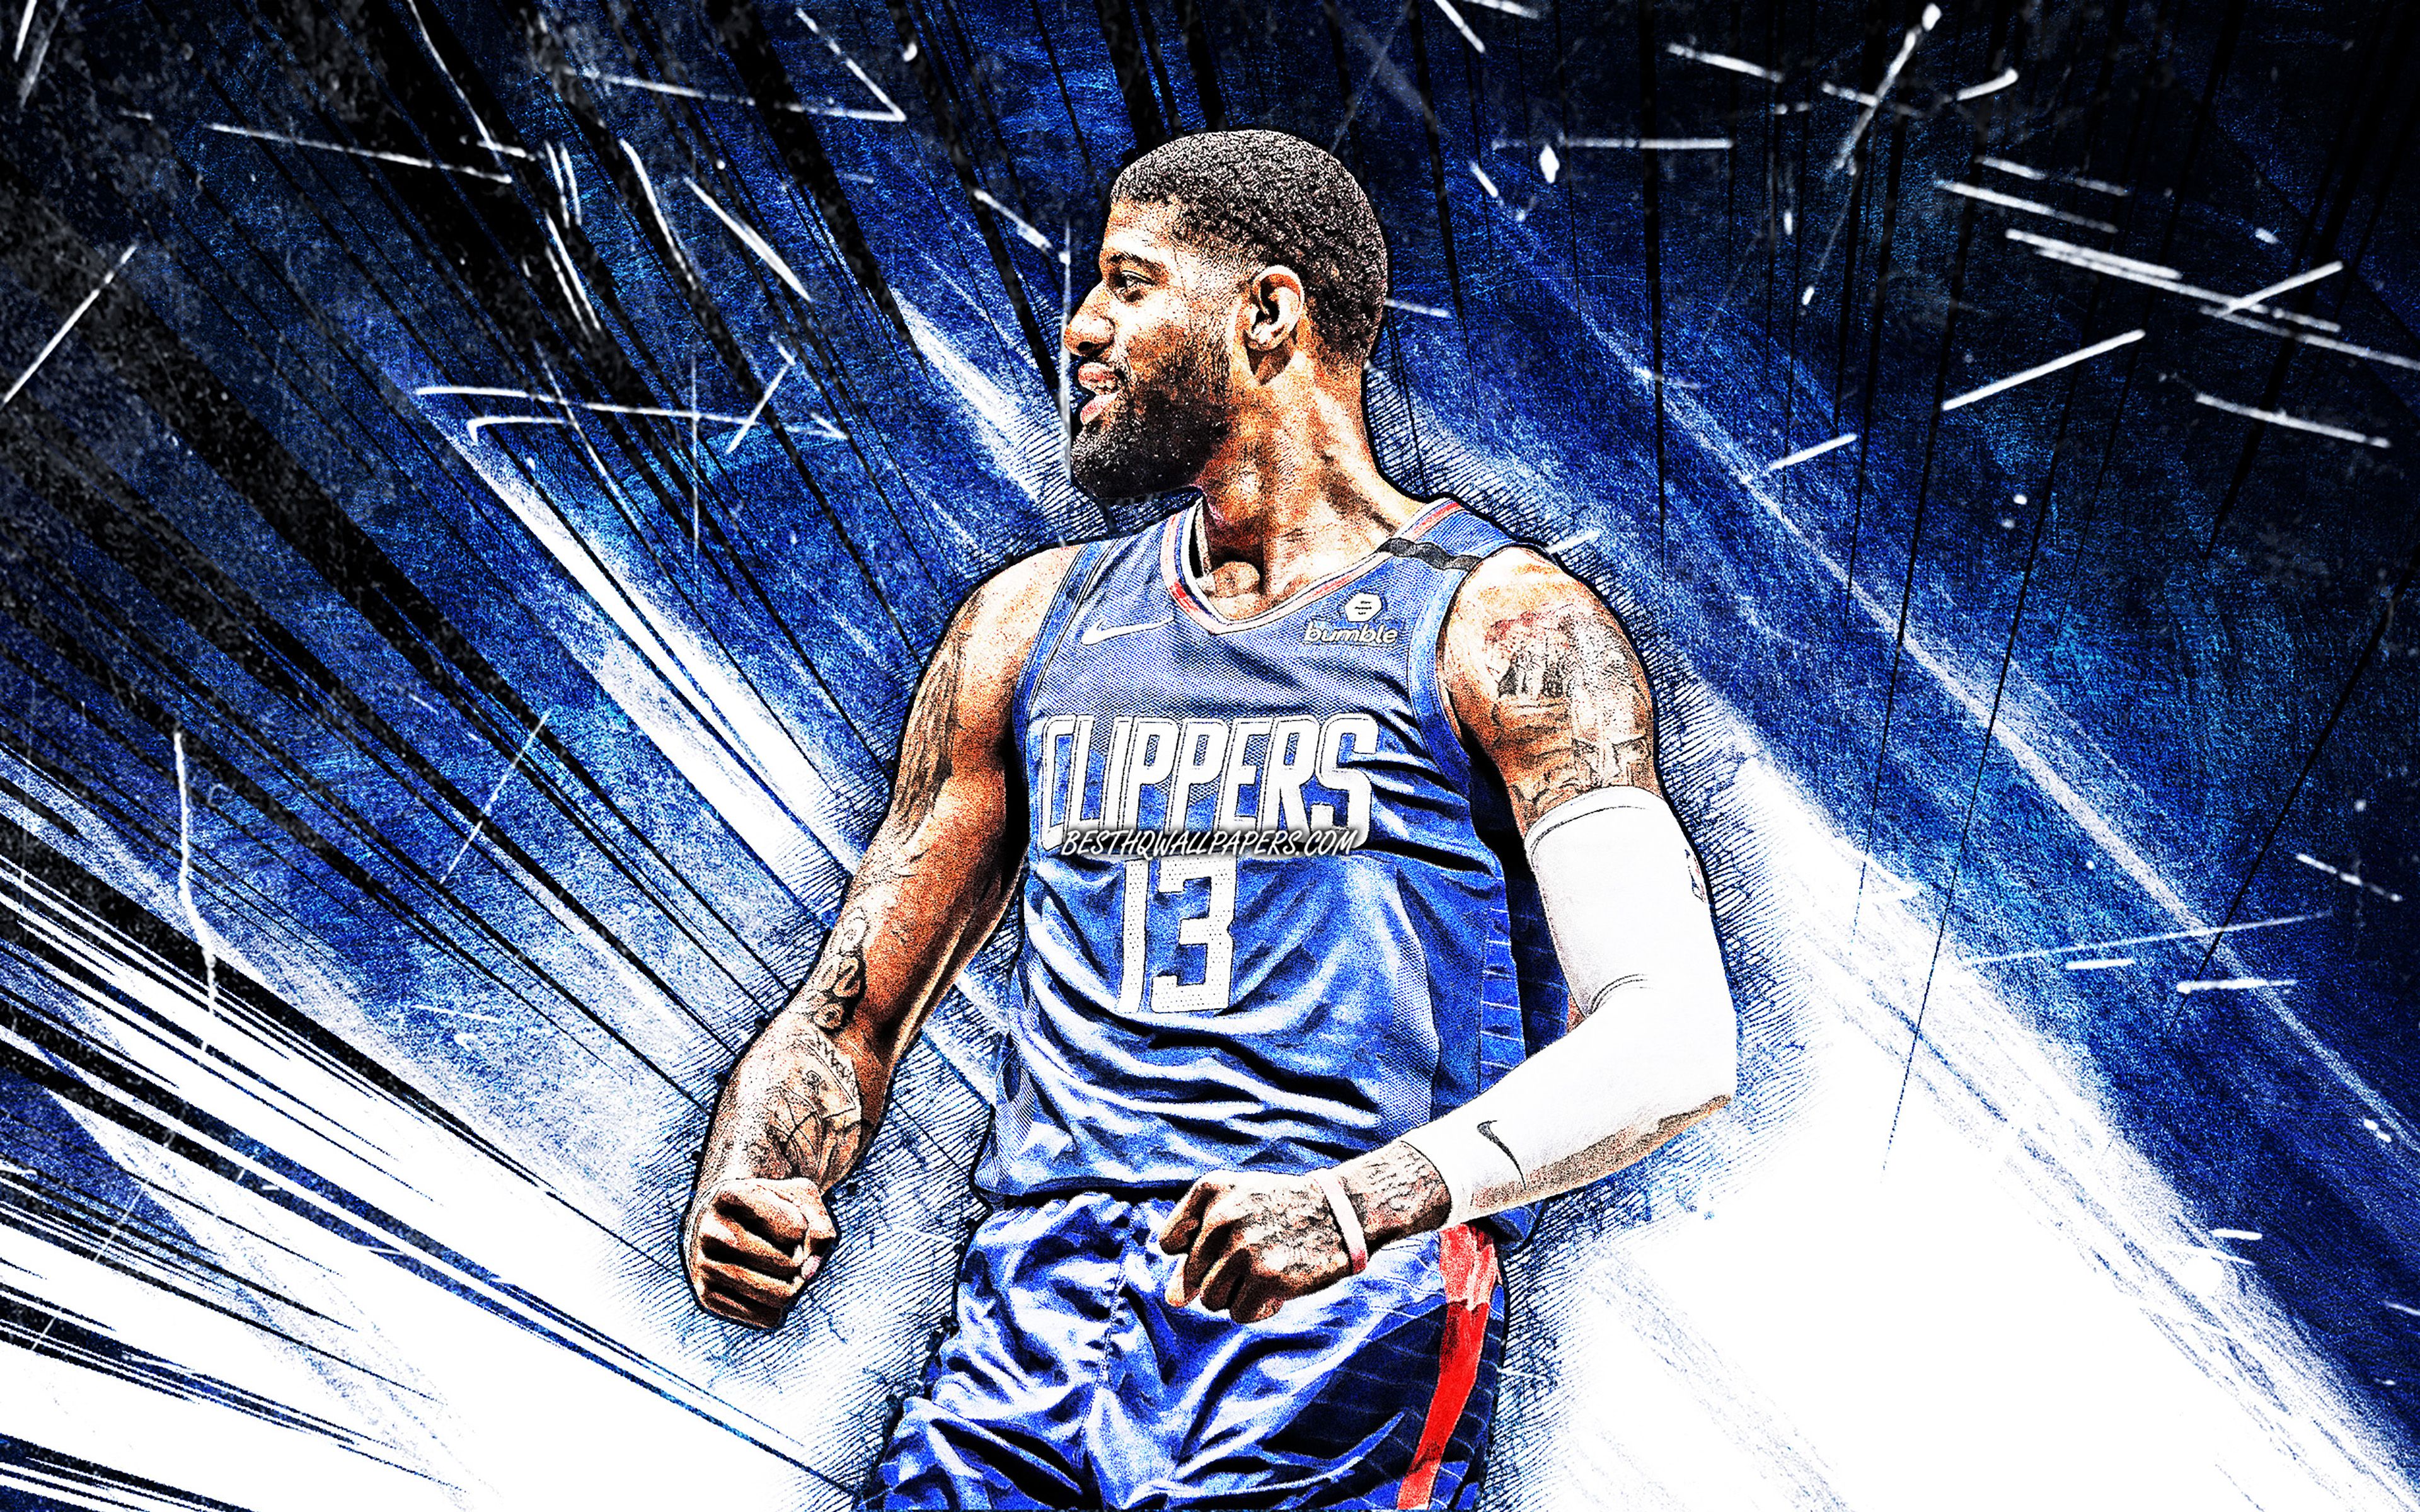 Download wallpaper 4k, Paul George, grunge art, Los Angeles Clippers, NBA, basketball, blue abstract rays, Paul Clifton Anthony George, USA, Paul George Los Angeles Clippers, creative, Paul George 4K, LA Clippers for